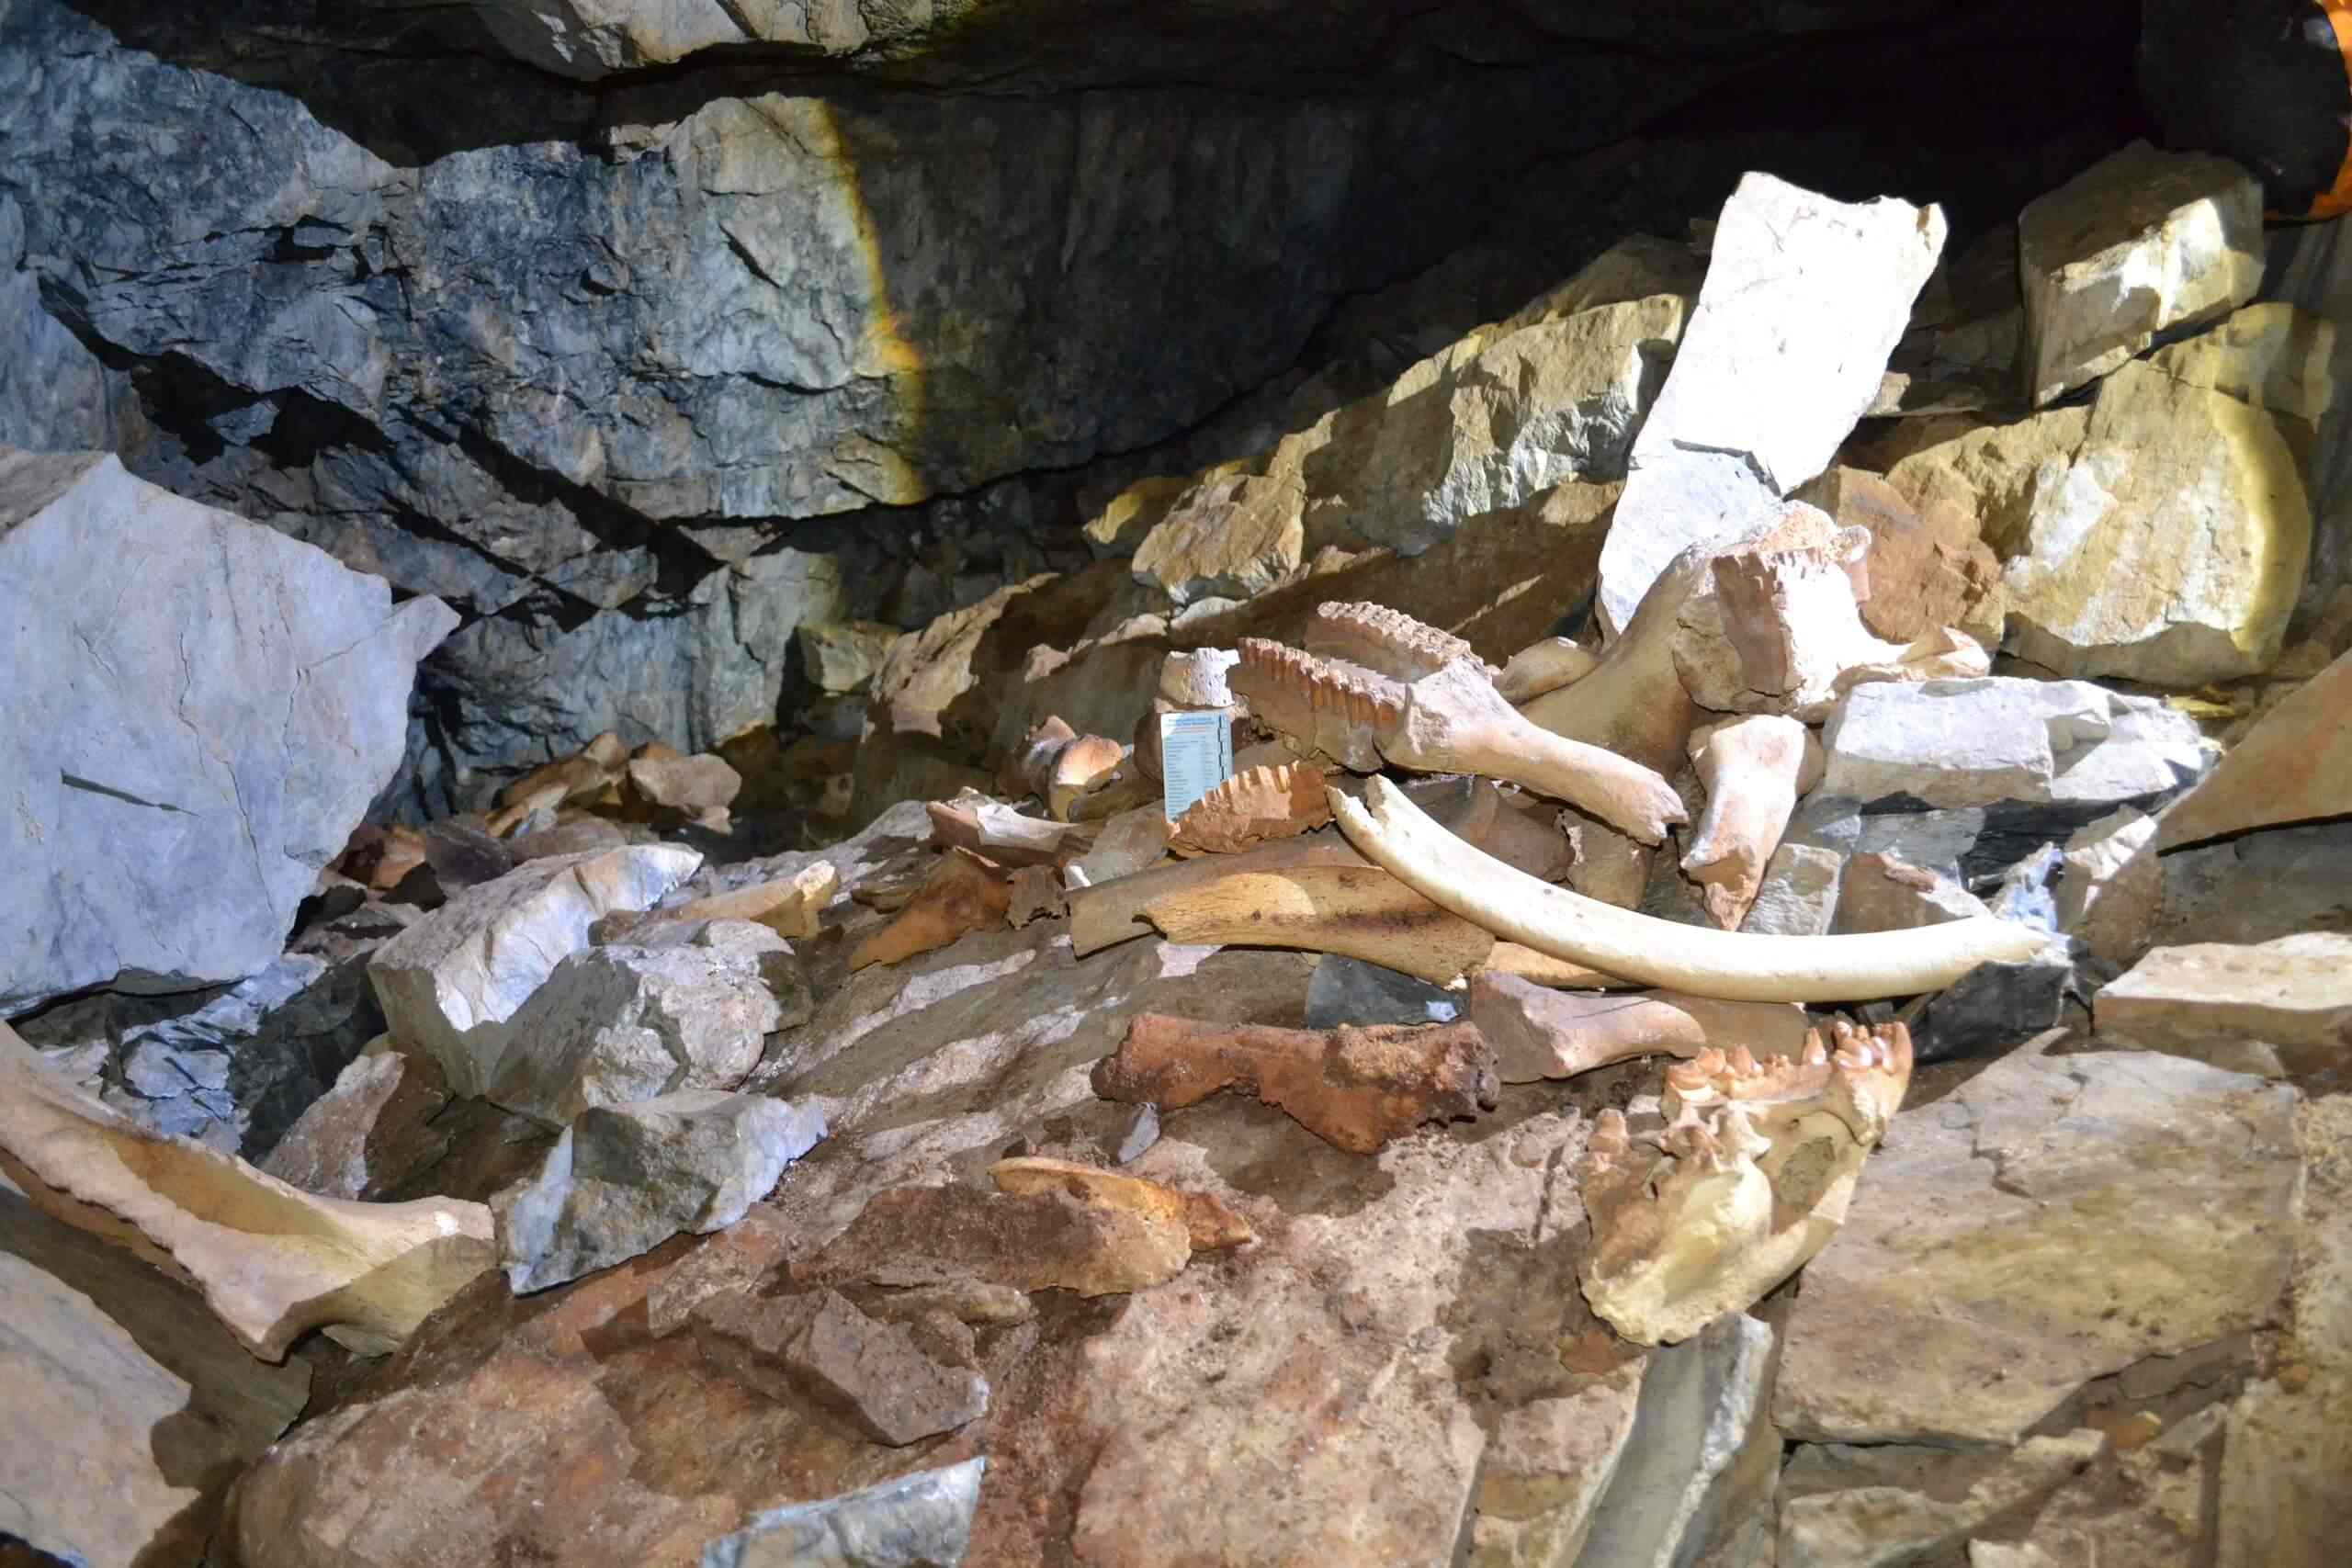 Bones of mammoths, rhinos, wooly bison, yaks, deer, gazelle, and many other species were uncovered in the cave. Image credit: V. S. Sobolev Institute of Geology and Mineralogy